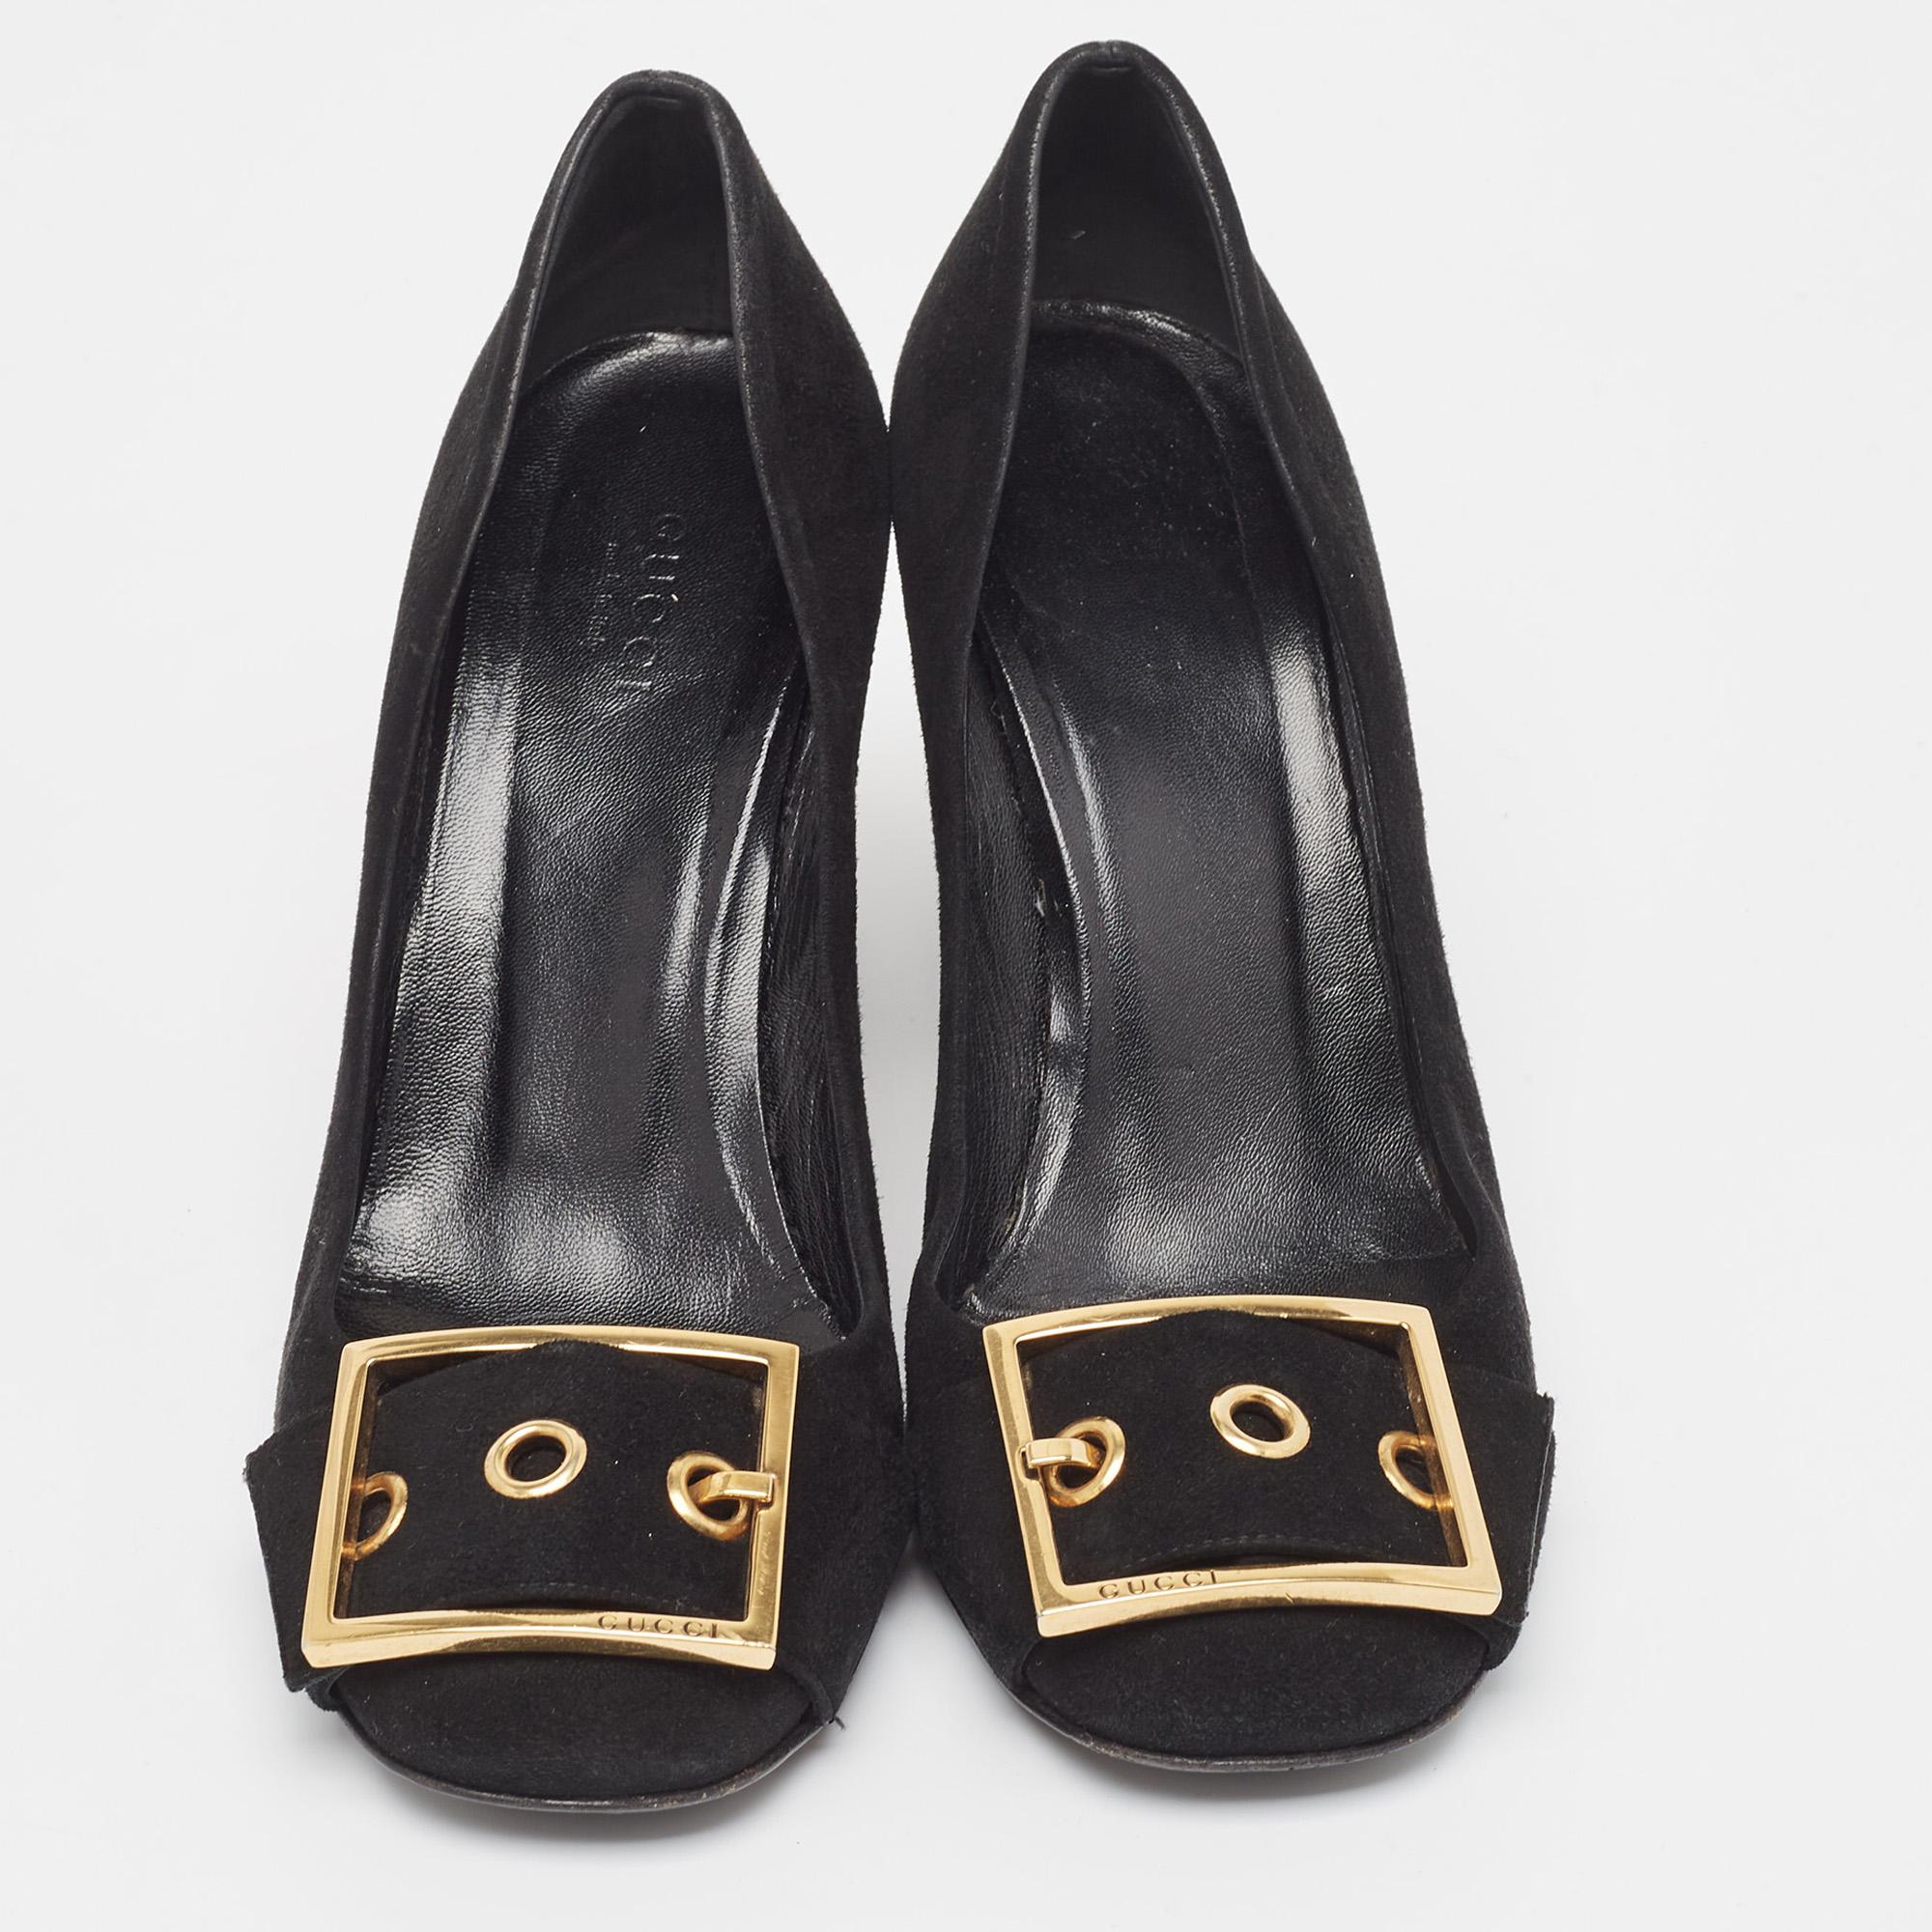 The fashion house’s tradition of excellence, coupled with modern design sensibilities, works to make these Gucci black pumps a fabulous choice. They'll help you deliver a chic look with ease.

